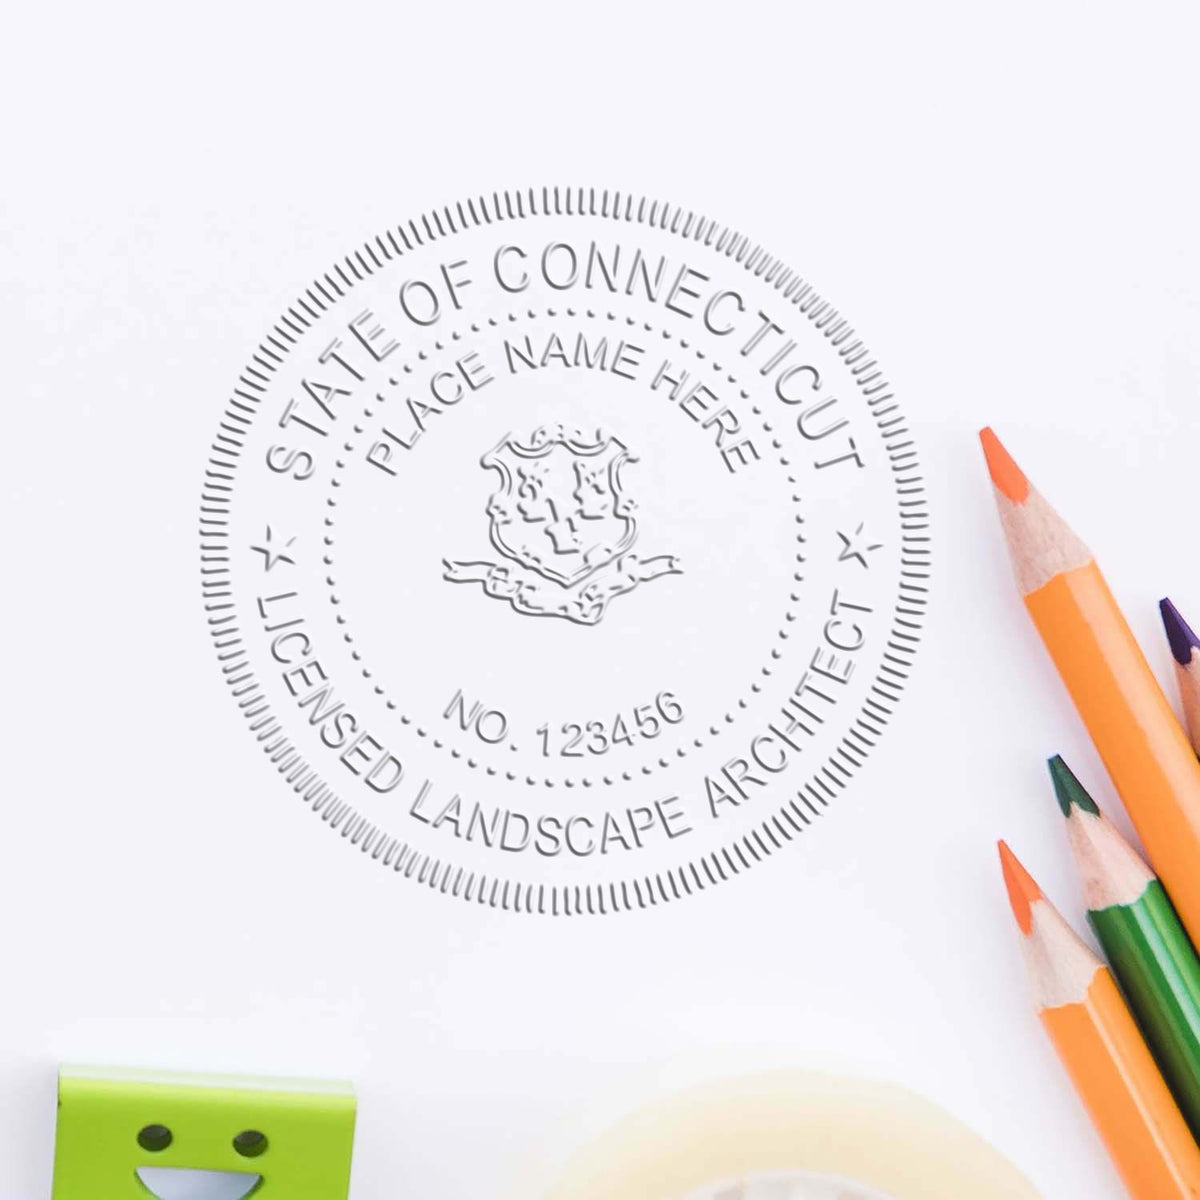 A stamped imprint of the Gift Connecticut Landscape Architect Seal in this stylish lifestyle photo, setting the tone for a unique and personalized product.